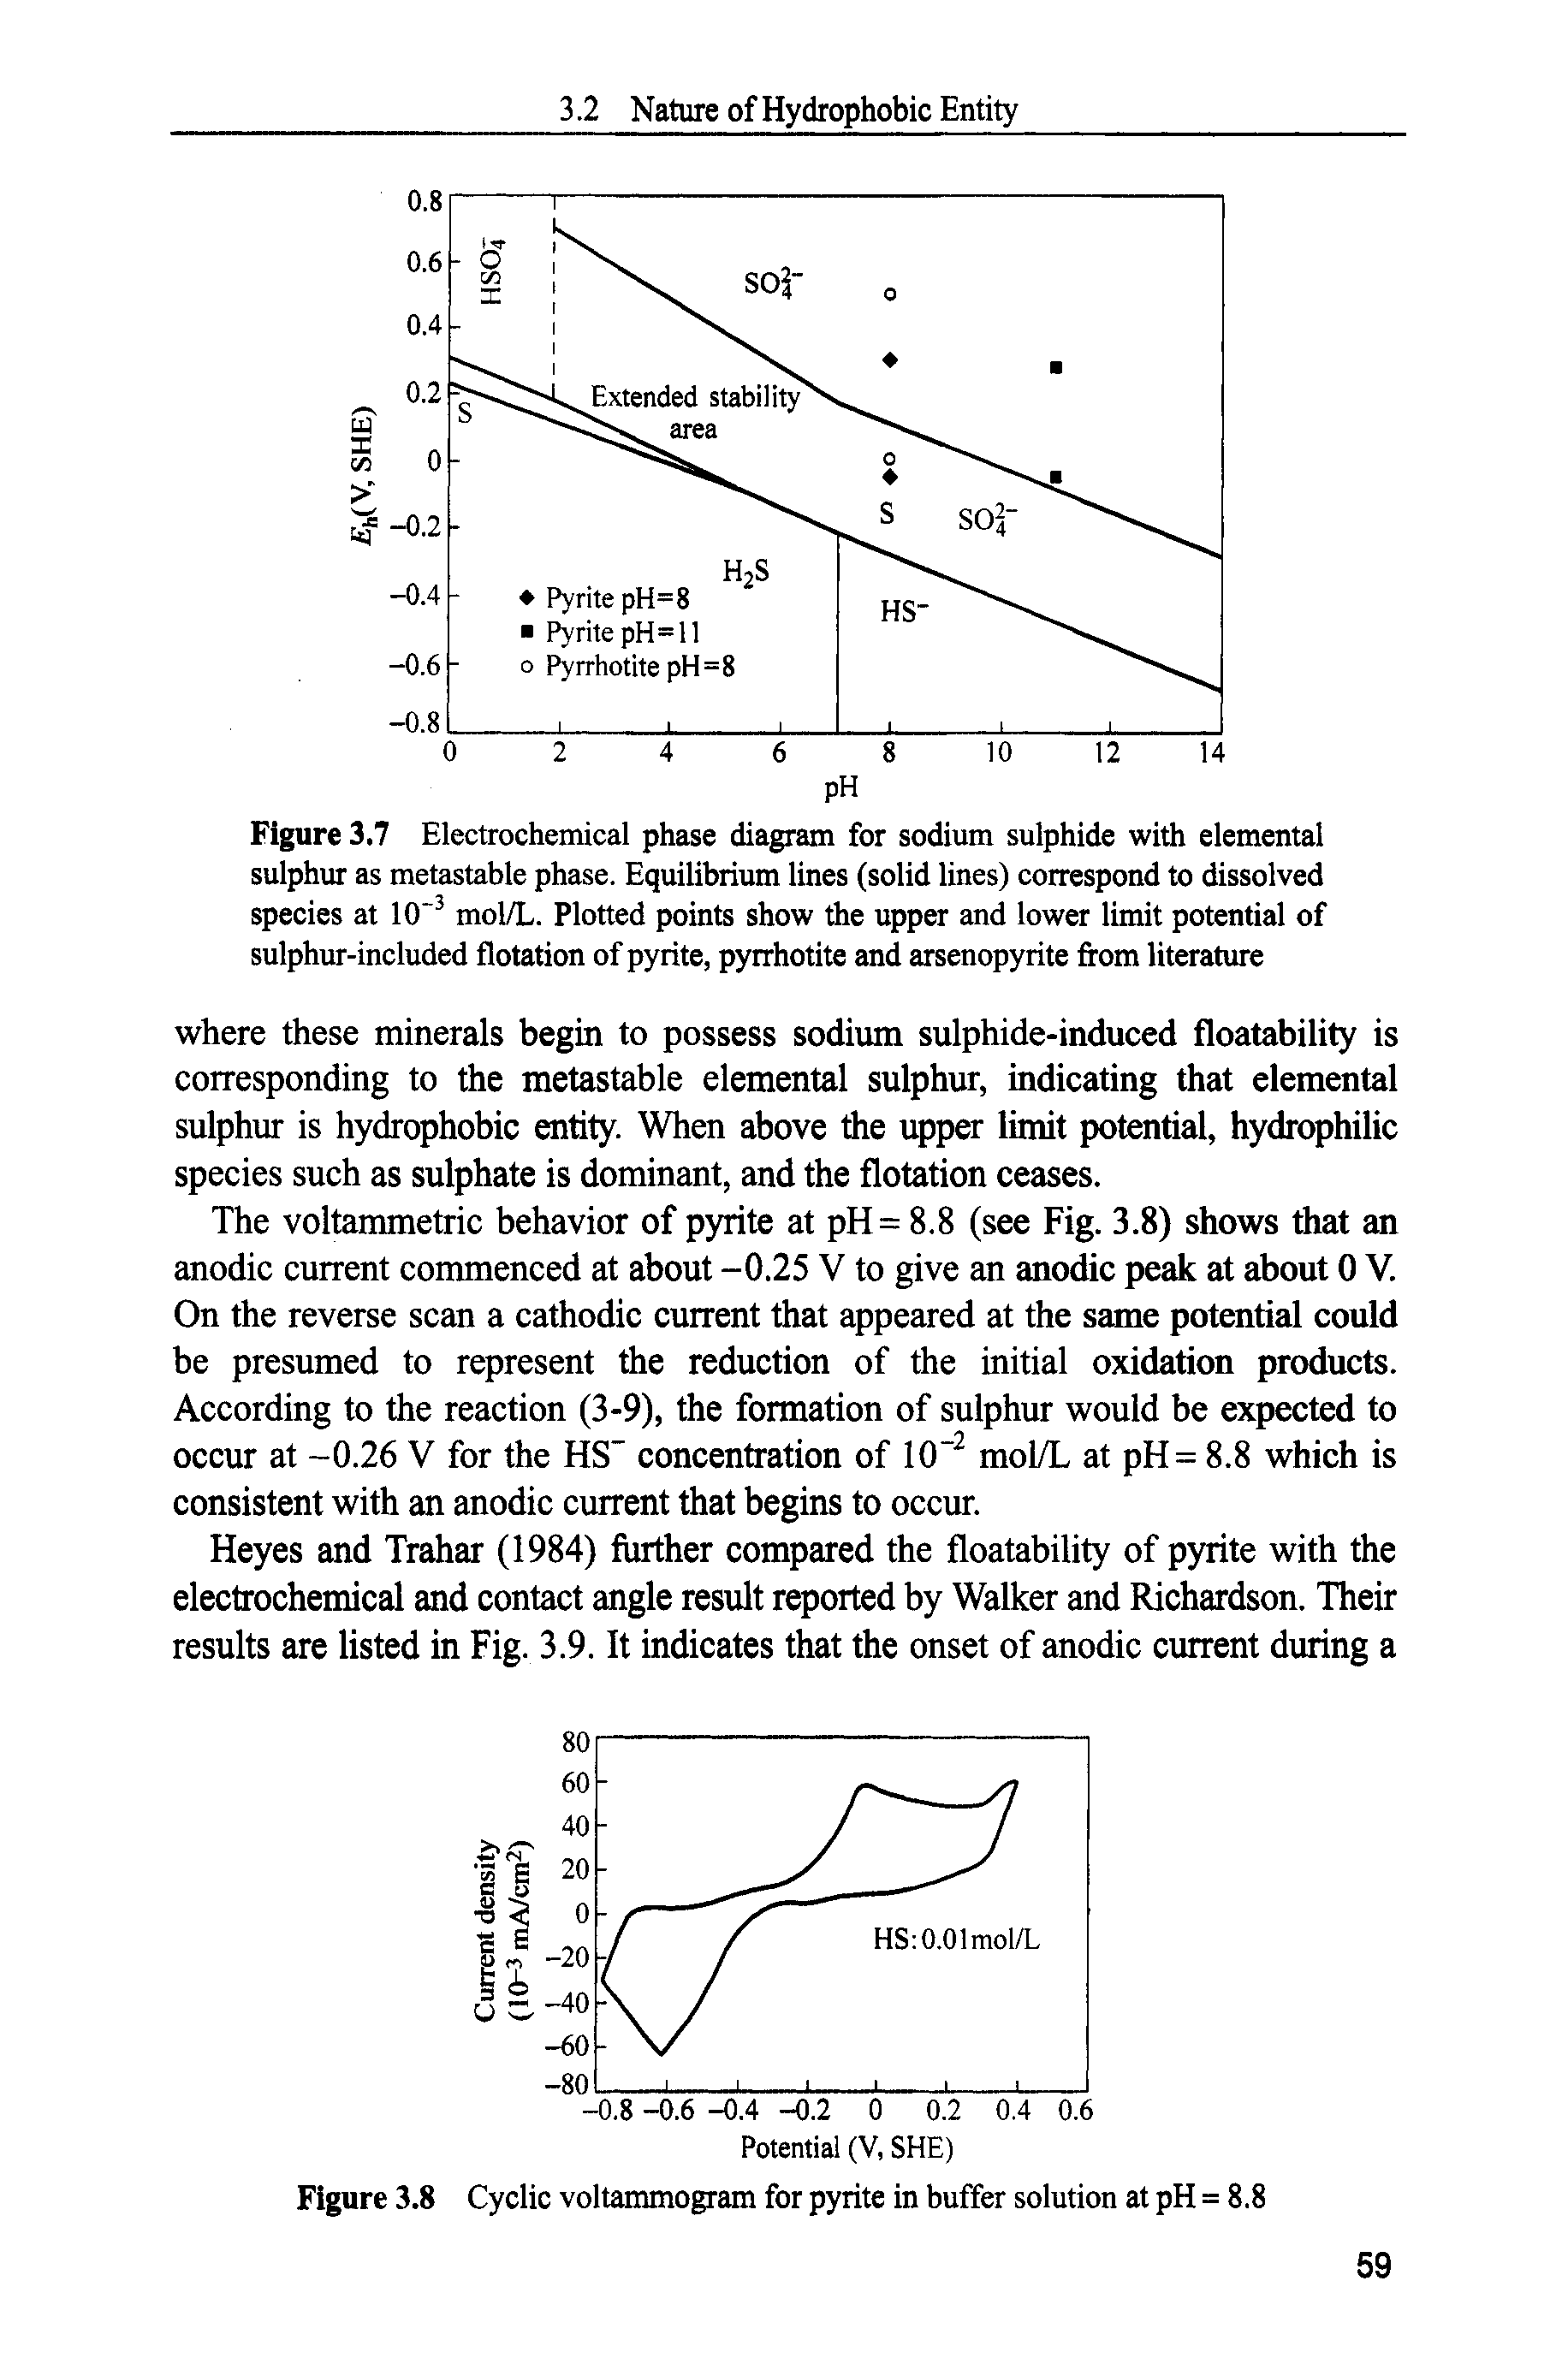 Figure 3.7 Electrochemical phase diagram for sodium sulphide with elemental sulphur as metastable phase. Equilibrium lines (solid lines) correspond to dissolved species at 10" mol/L. Plotted points show the upper and lower limit potential of sulphur-included flotation of pyrite, pyrrhotite and arsenopyrite from literature...